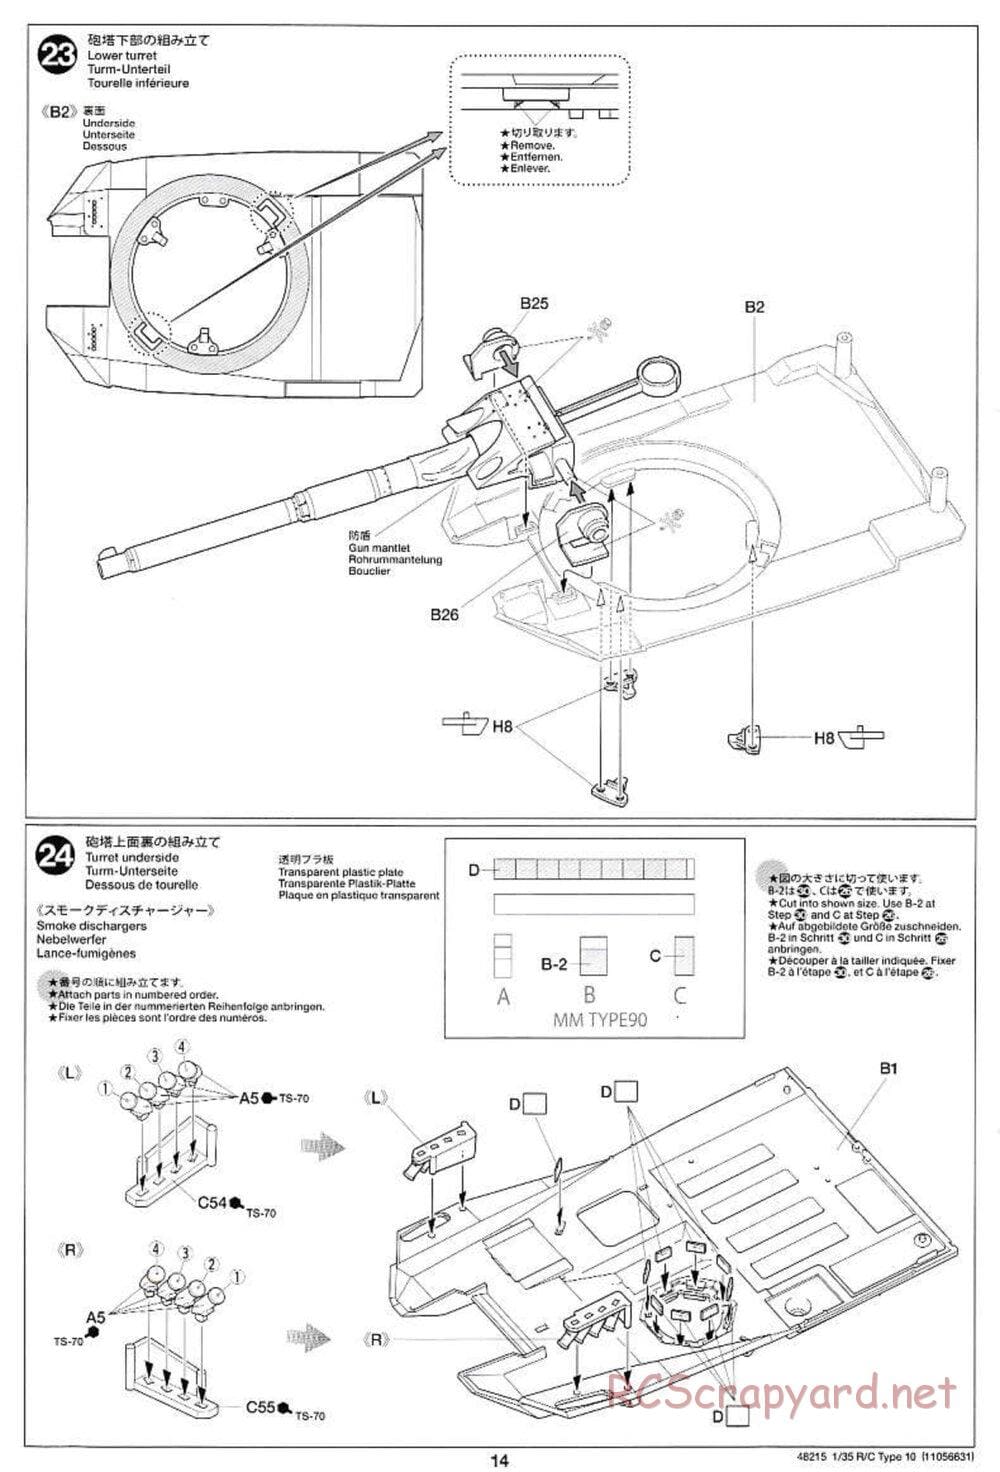 Tamiya - JGSDF Type 10 Tank - 1/35 Scale Chassis - Manual - Page 14